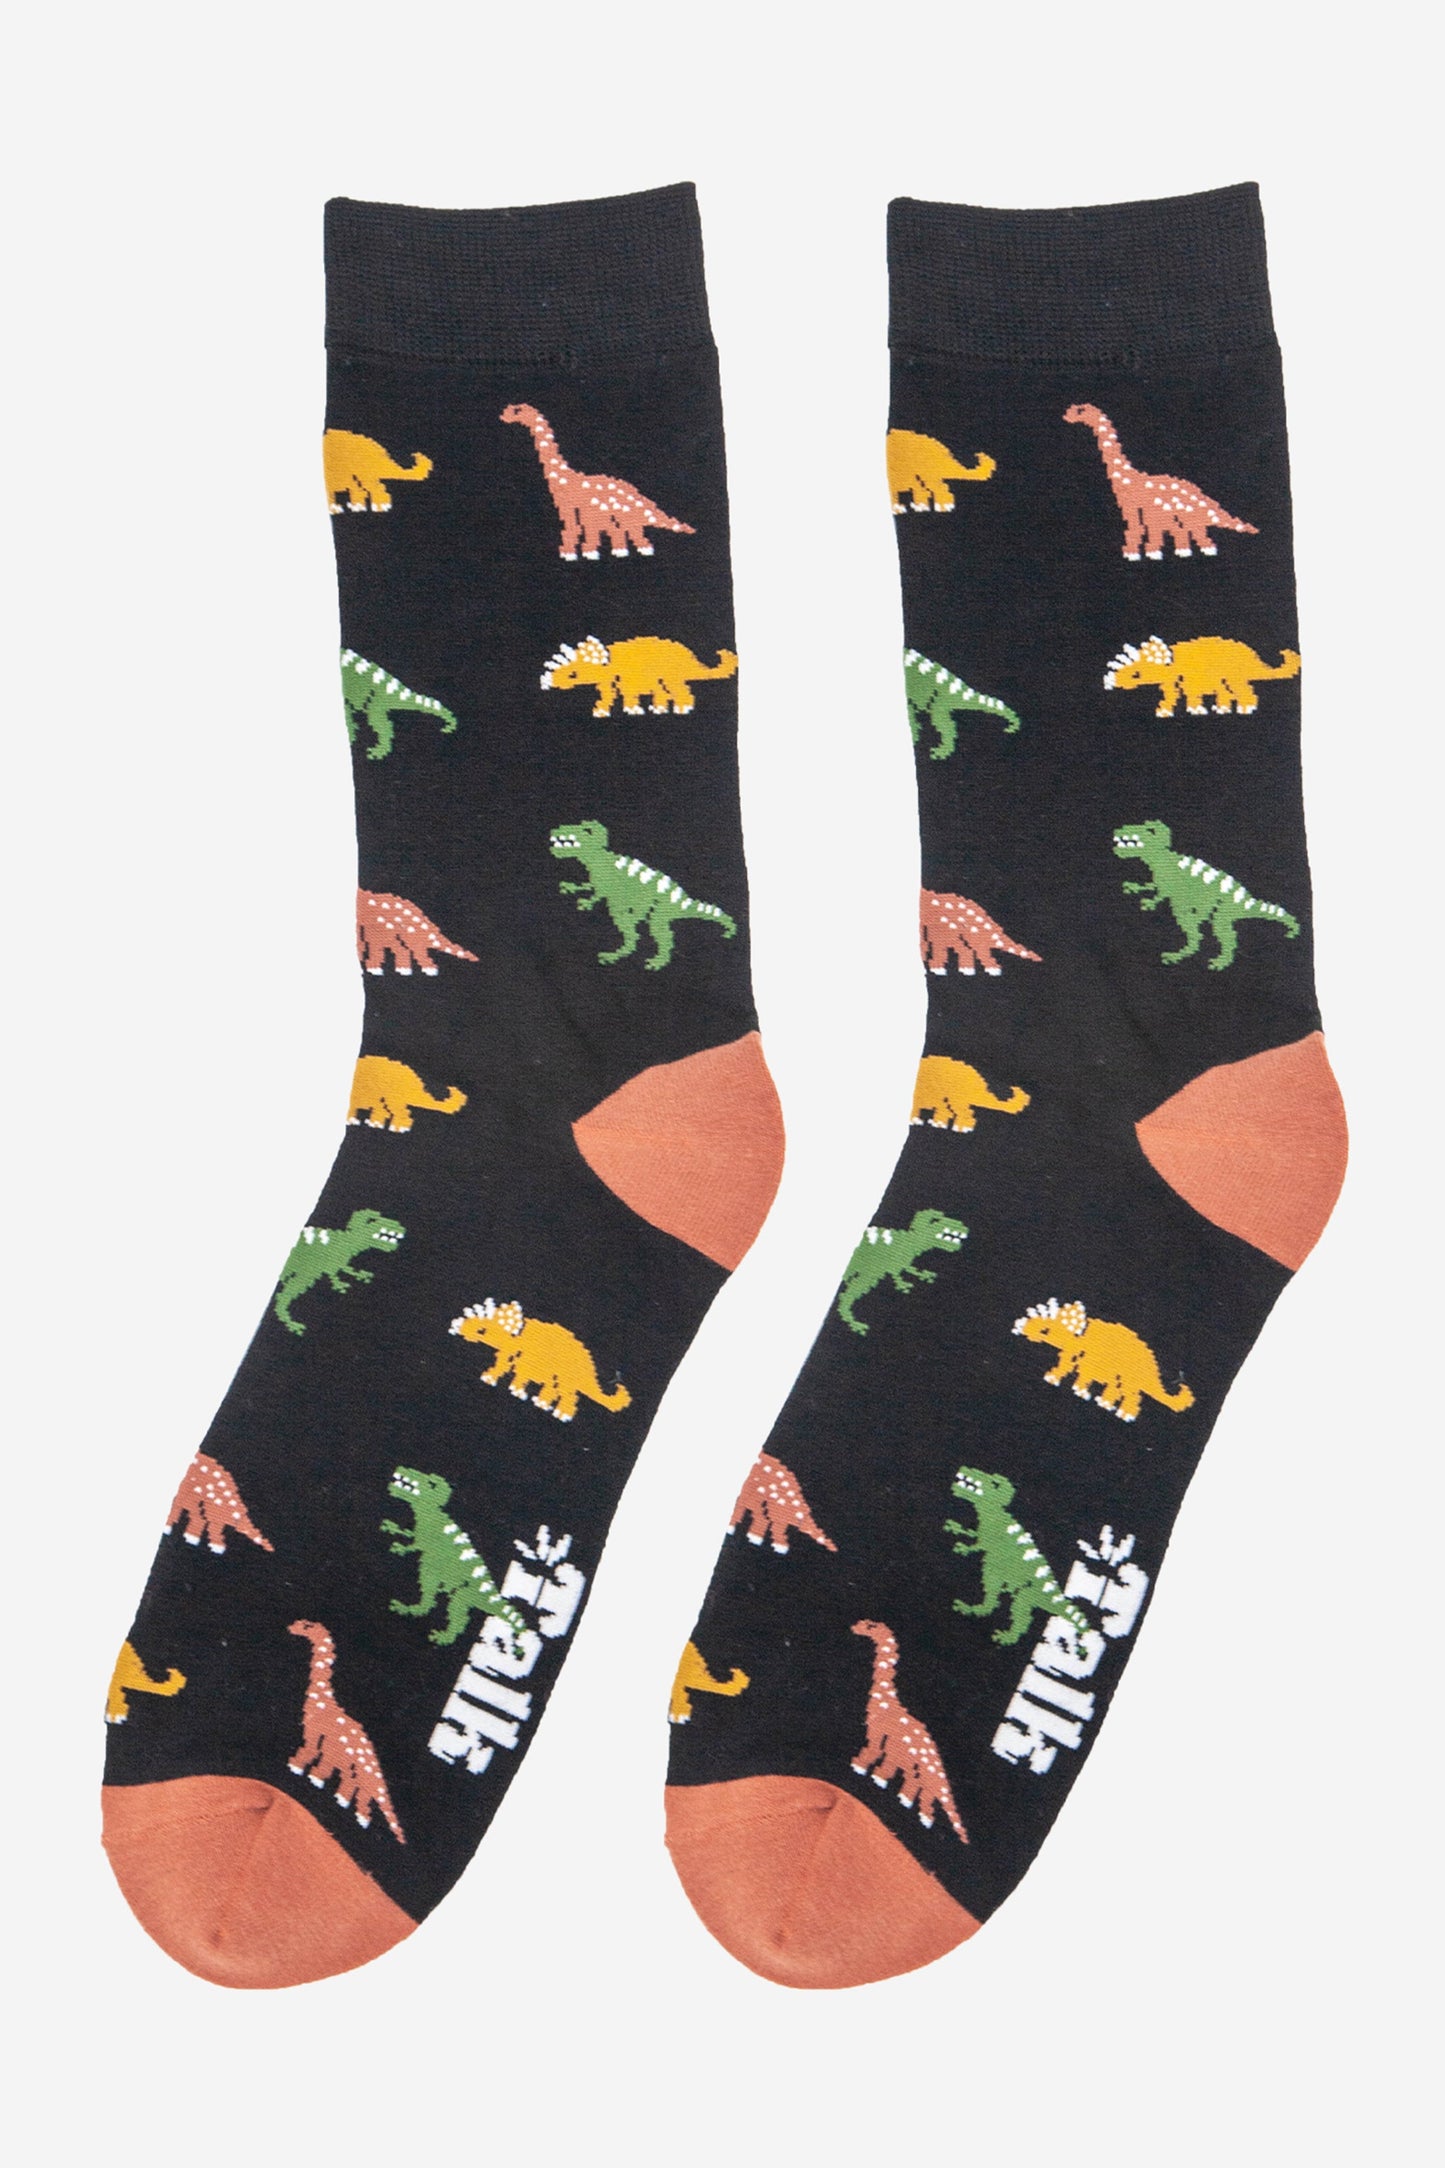 mens dinosaur pattern bamboo socks  showing the various dinosaurs, trex, triceratops and diplodocus